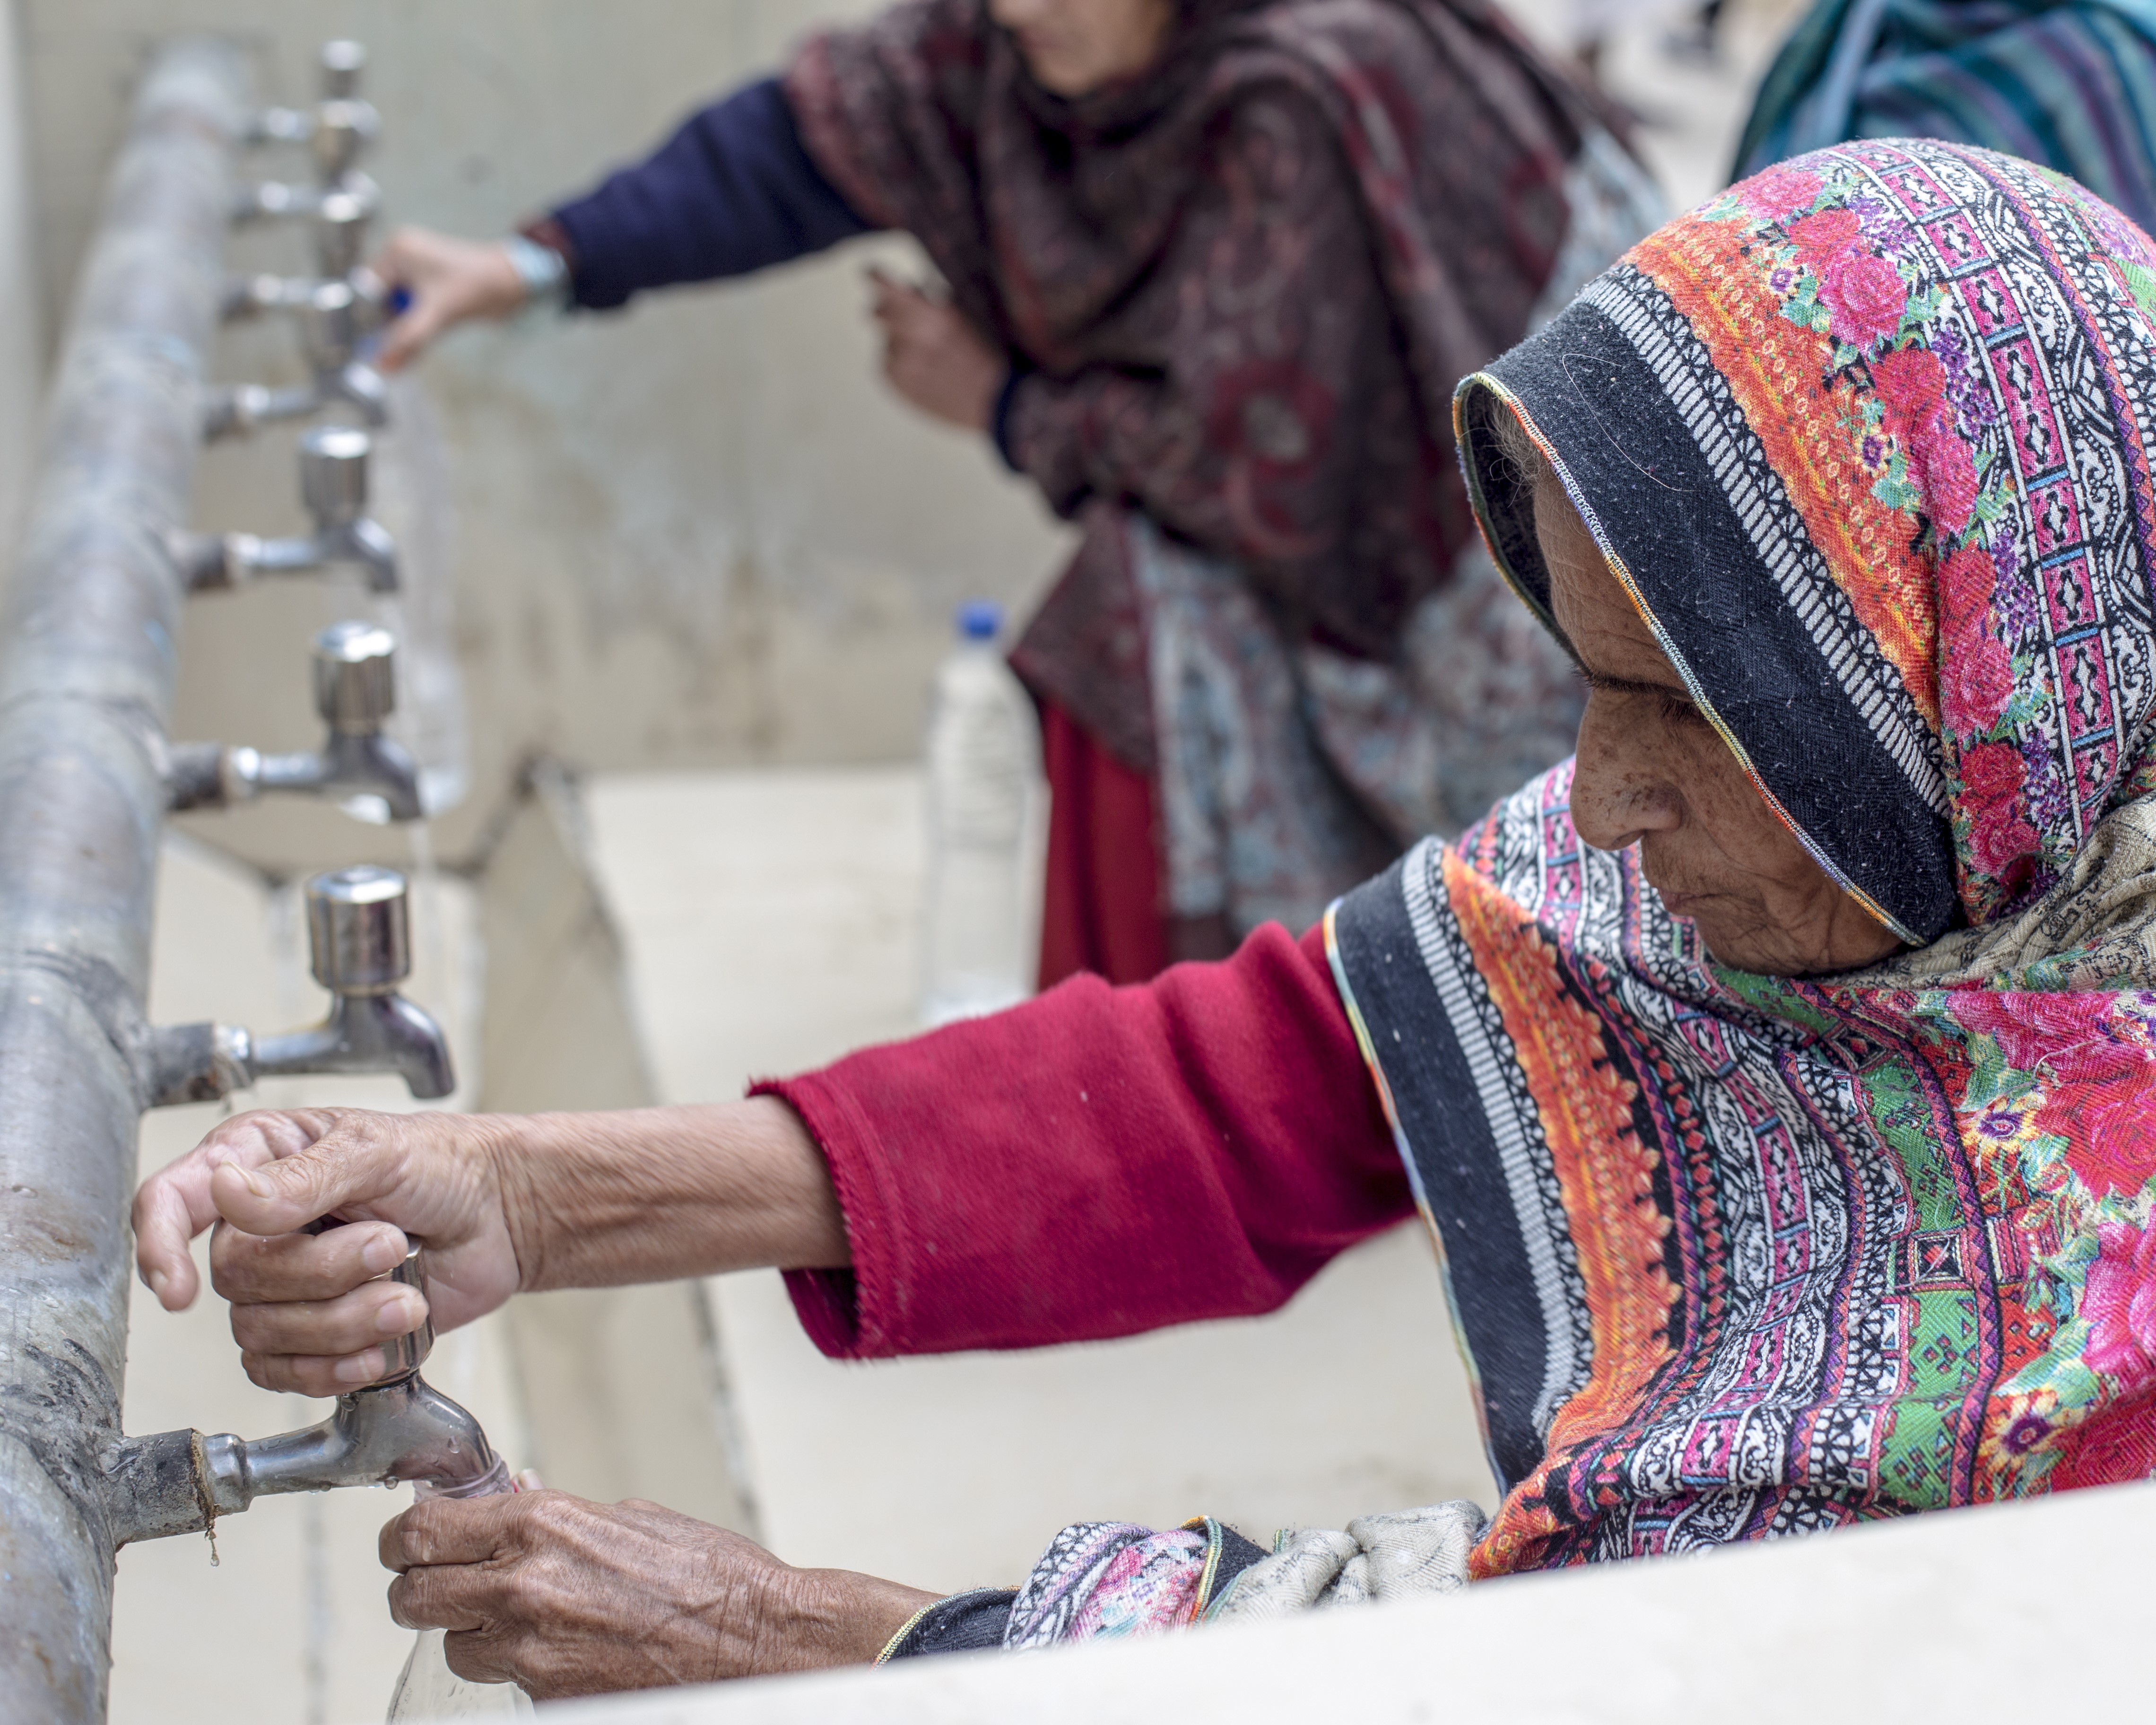 Rainwater is harvested in Pakistan to be used for washing hands